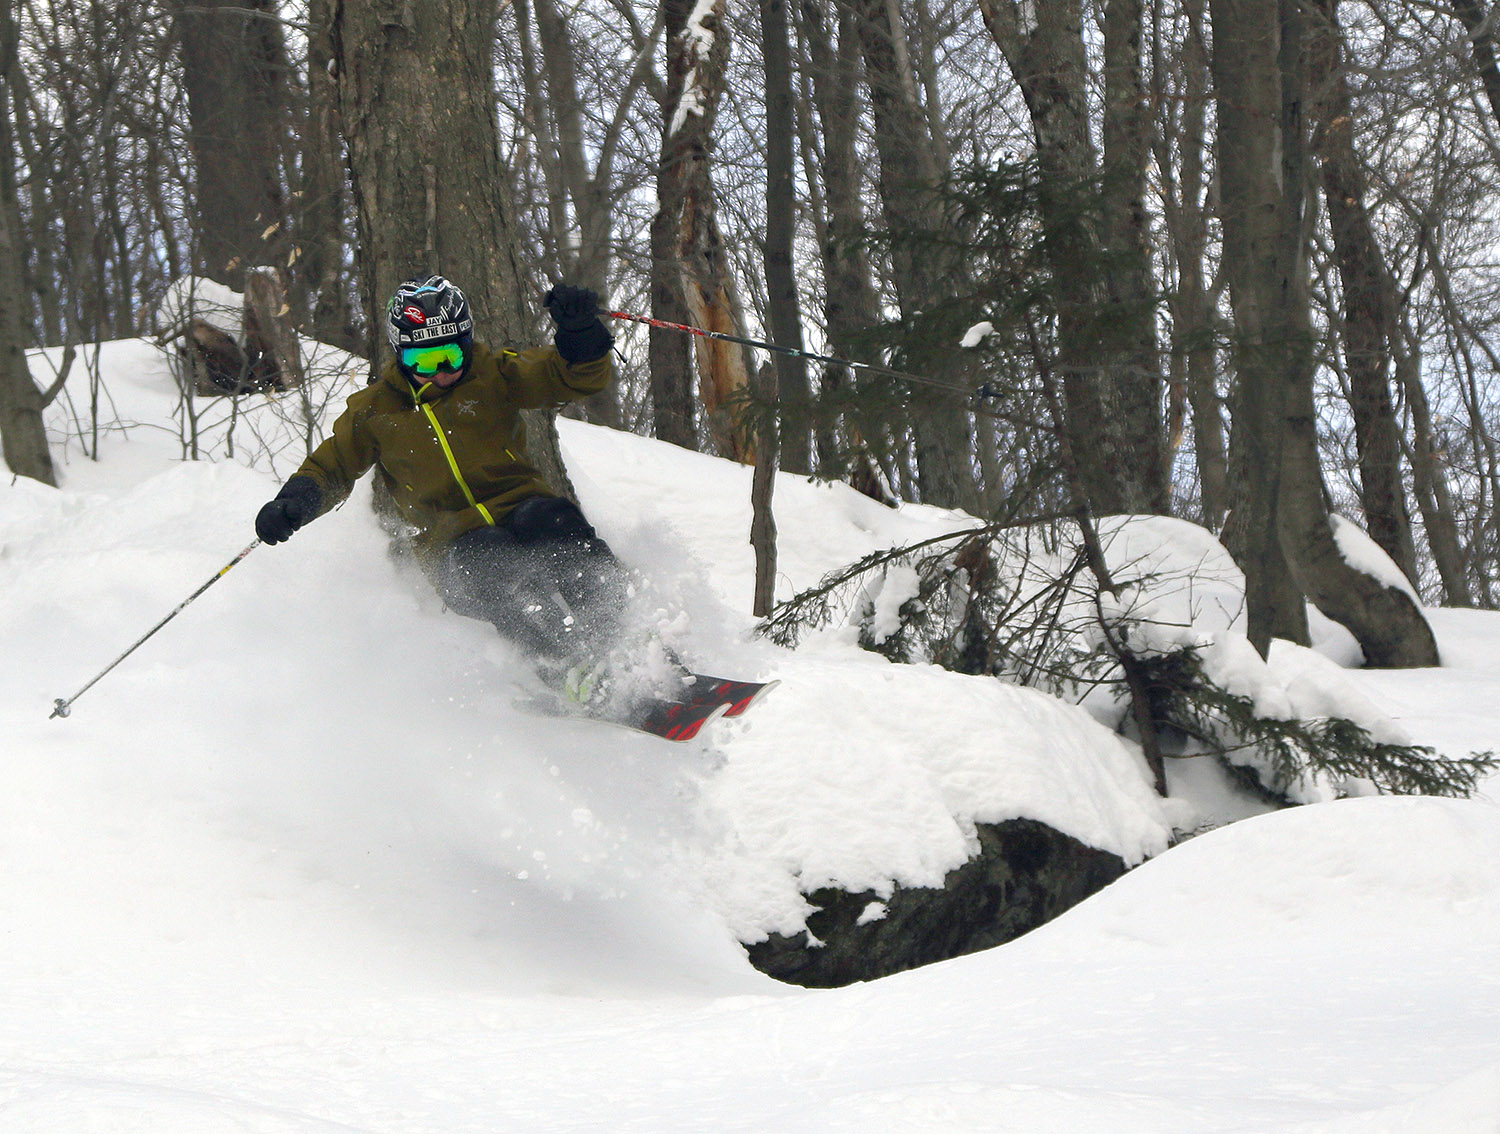 An image of Jay catching some air while skiing among the powder left over from Winter Storm Landon in the Doug's Knob area of Bolton Valley Ski Resort in Vermont